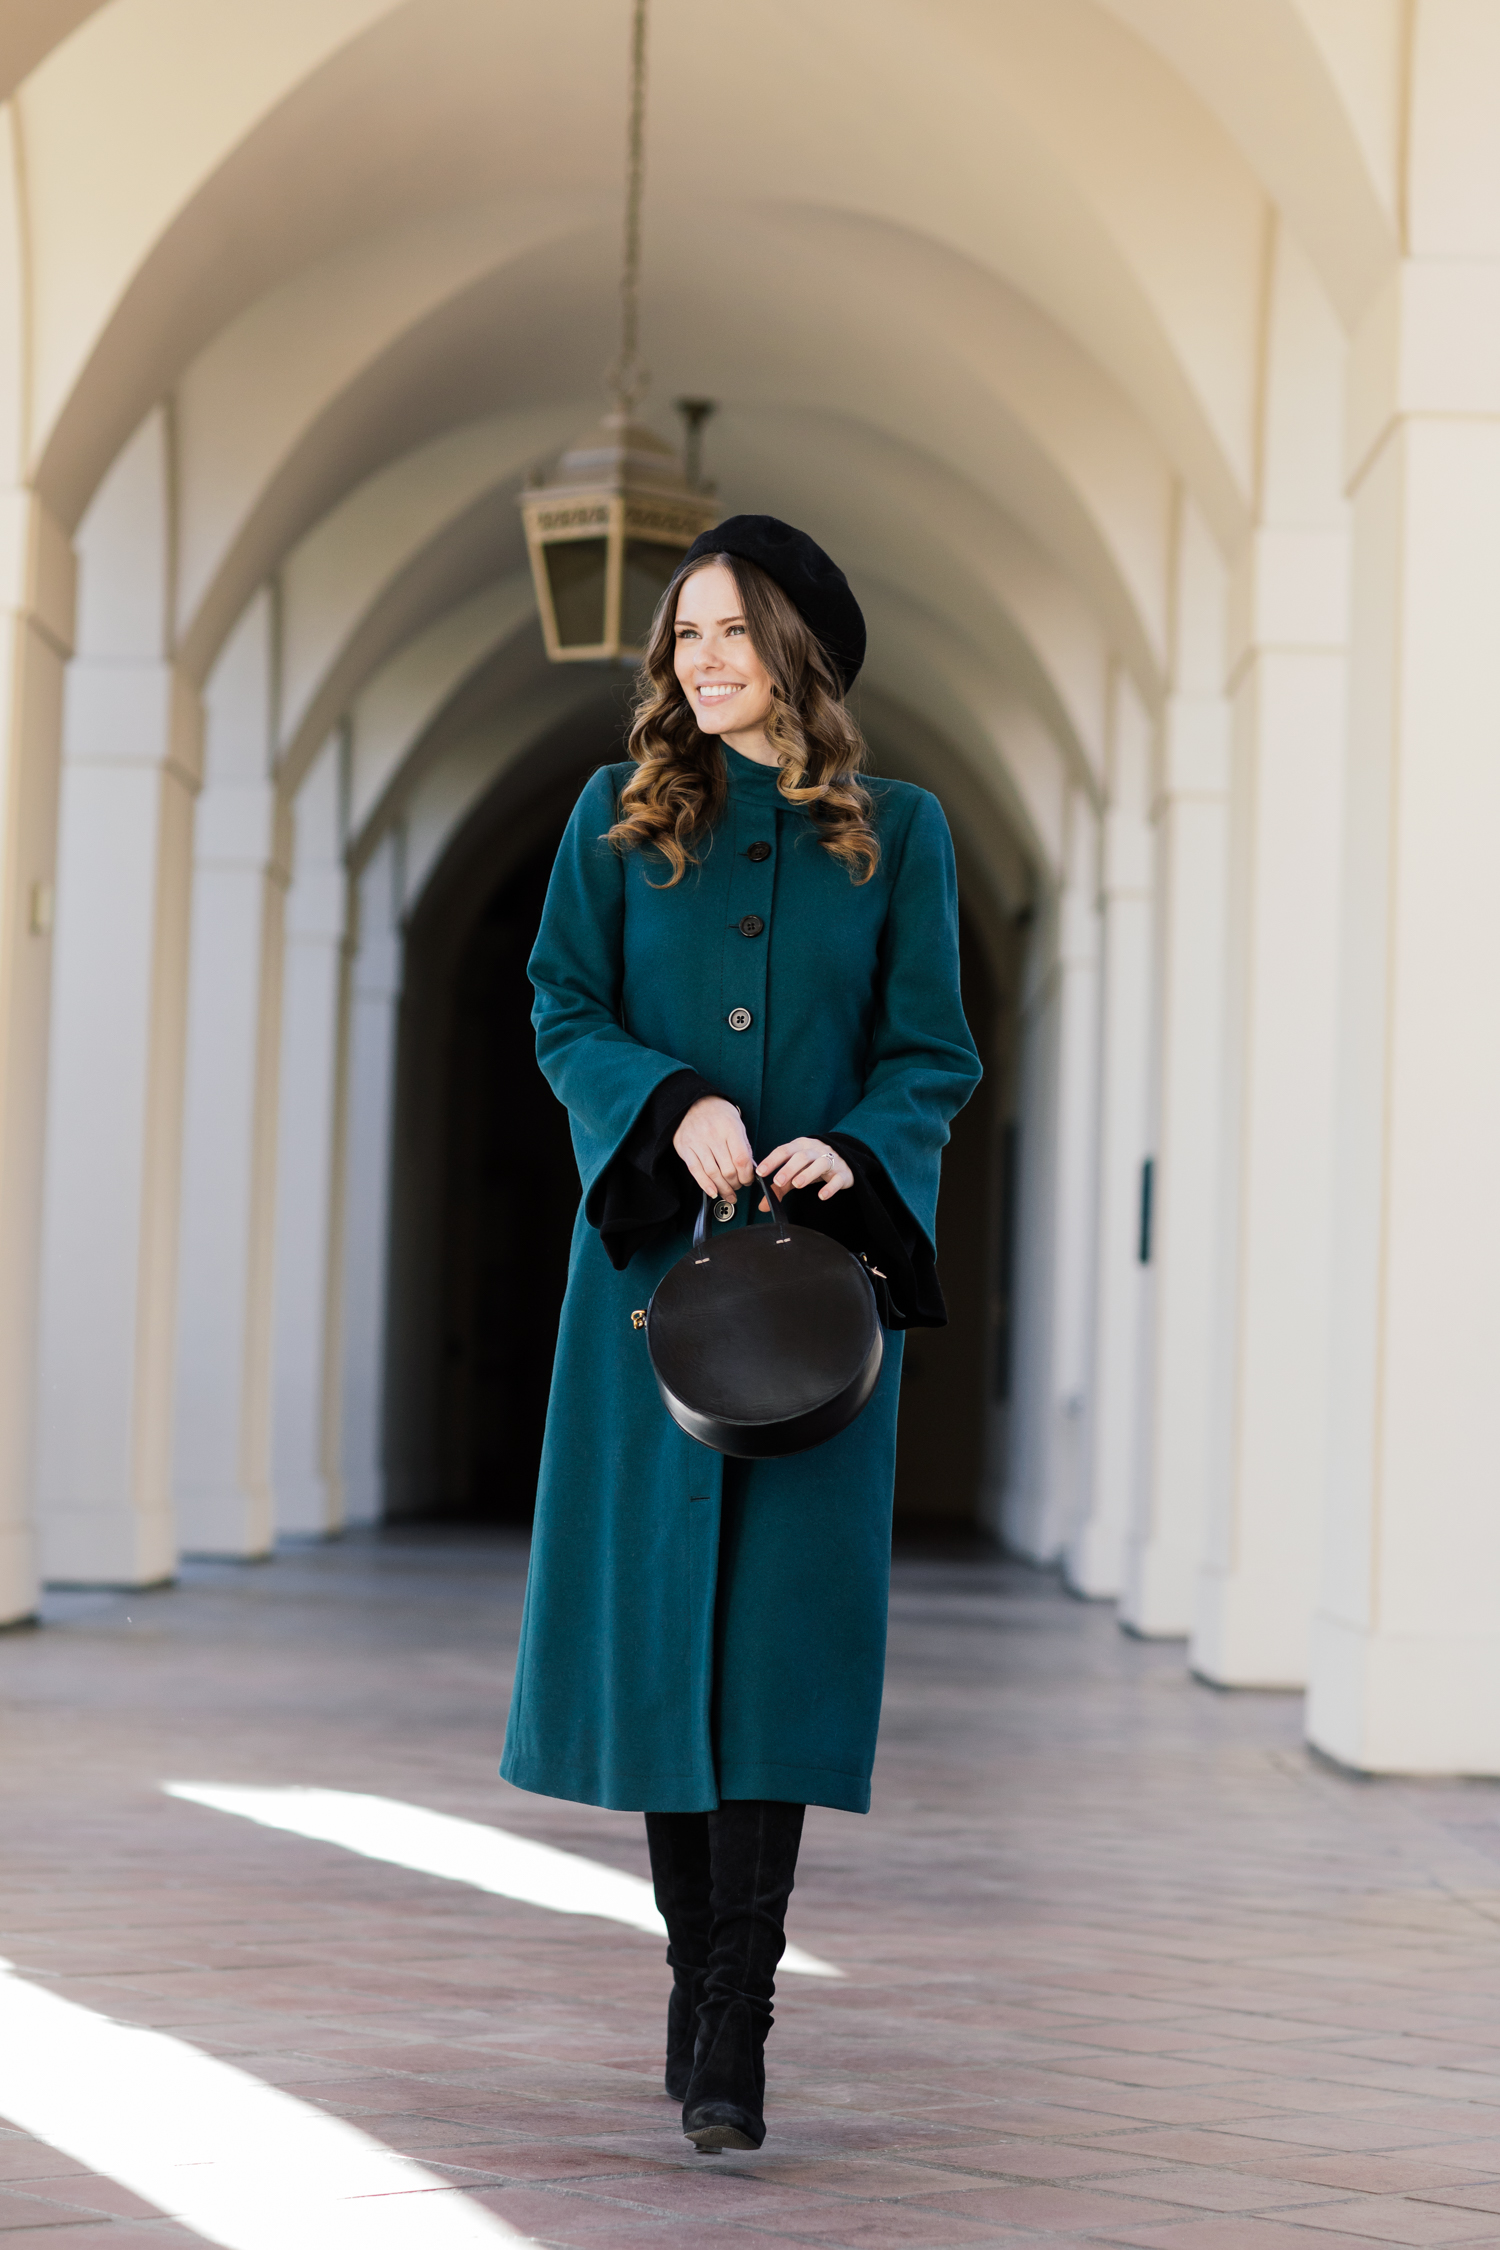 Alyssa Campanella of The A List blog channels her inner duchess wearing Frilly Audrey Coat and Clare V Alistair bag